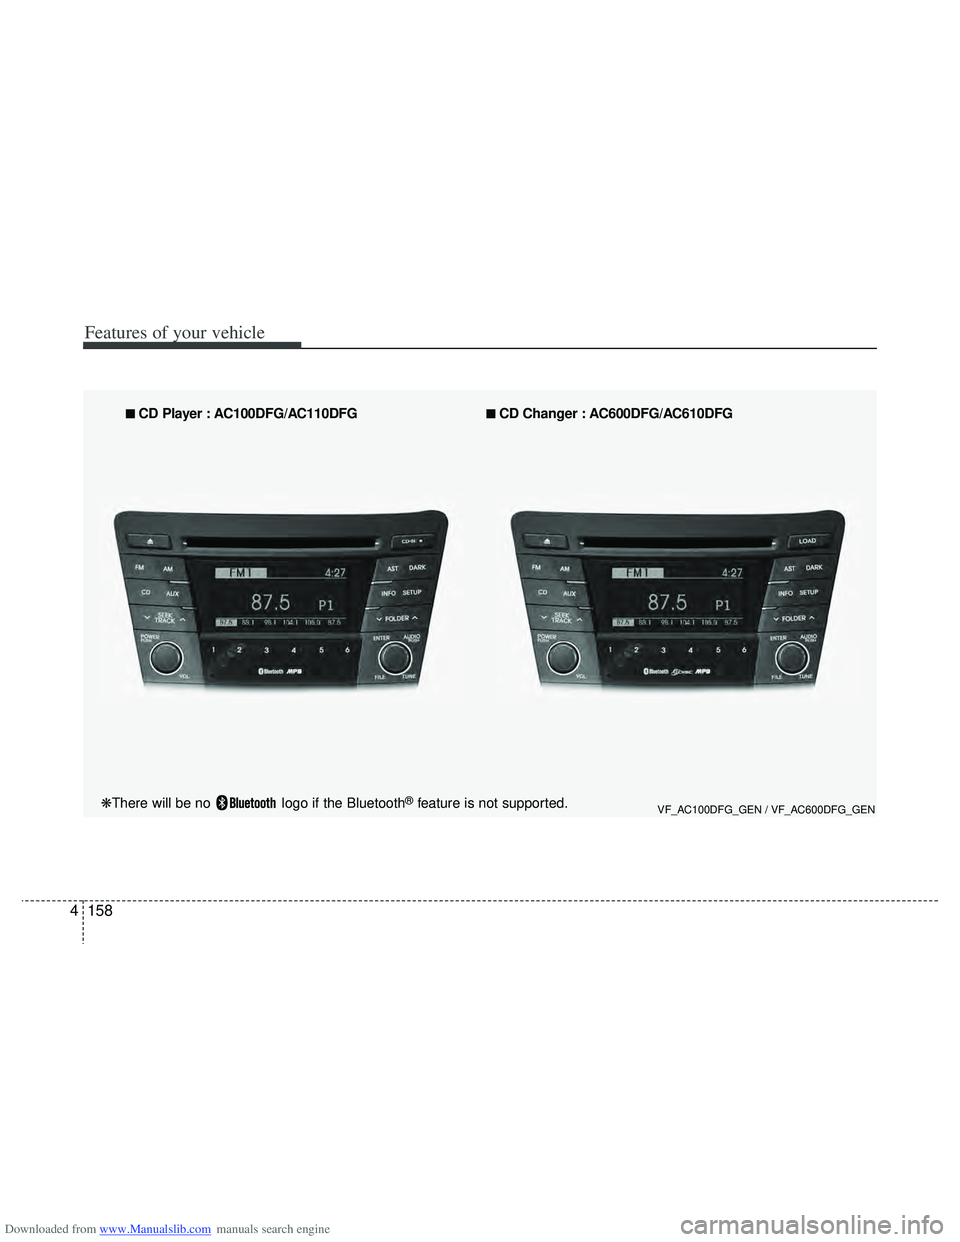 HYUNDAI I40 2019  Owners Manual Downloaded from www.Manualslib.com manuals search engine Features of your vehicle
158
4
VF_AC100DFG_GEN / VF_AC600DFG_GEN
■
■  
 CD Player : AC100DFG/AC110DFG■
■ 
 CD Changer : AC600DFG/AC610D